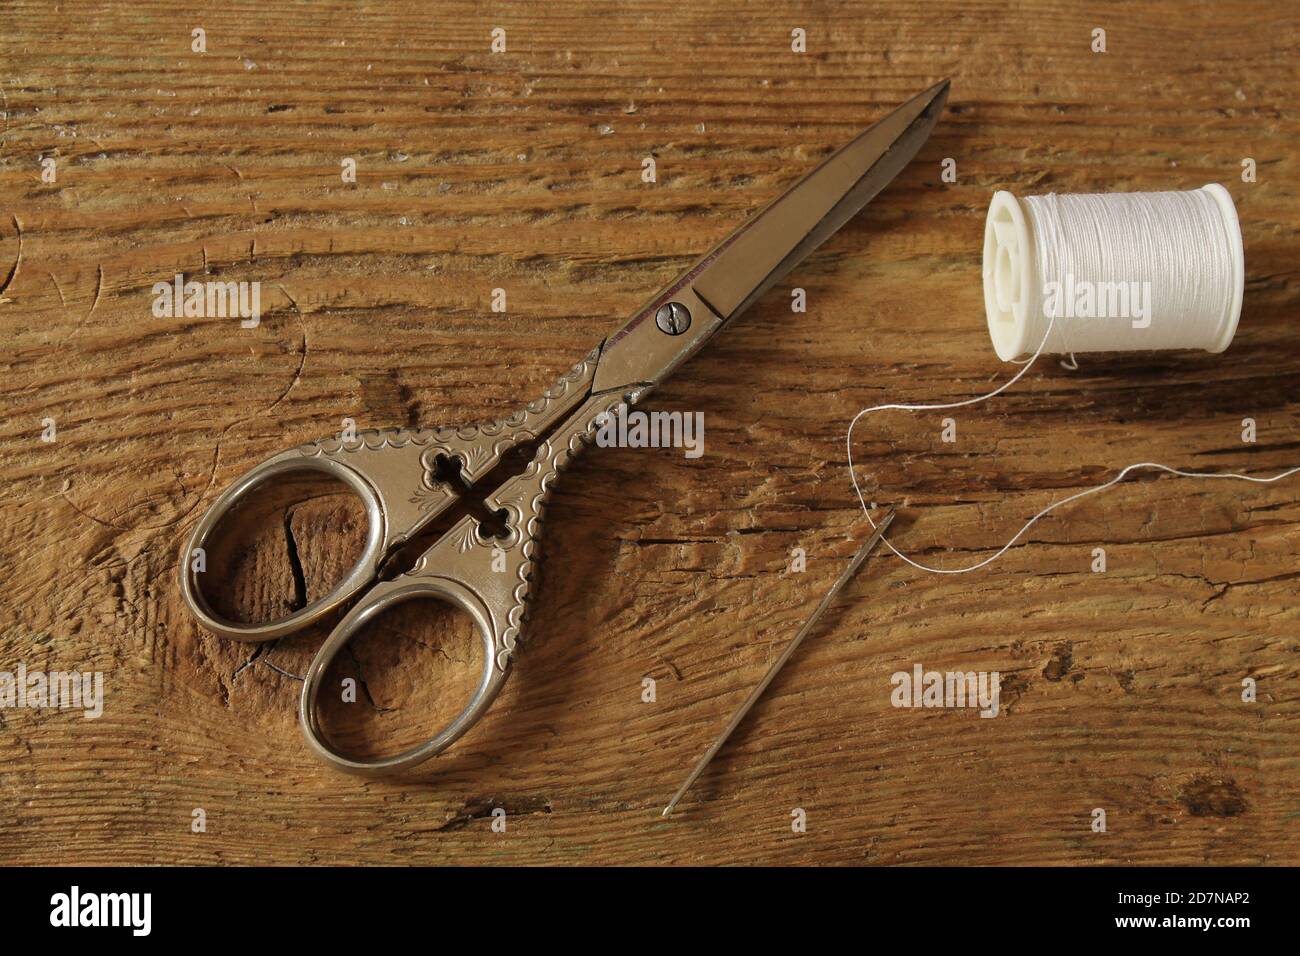 Old scissors with needle and thread Stock Photo